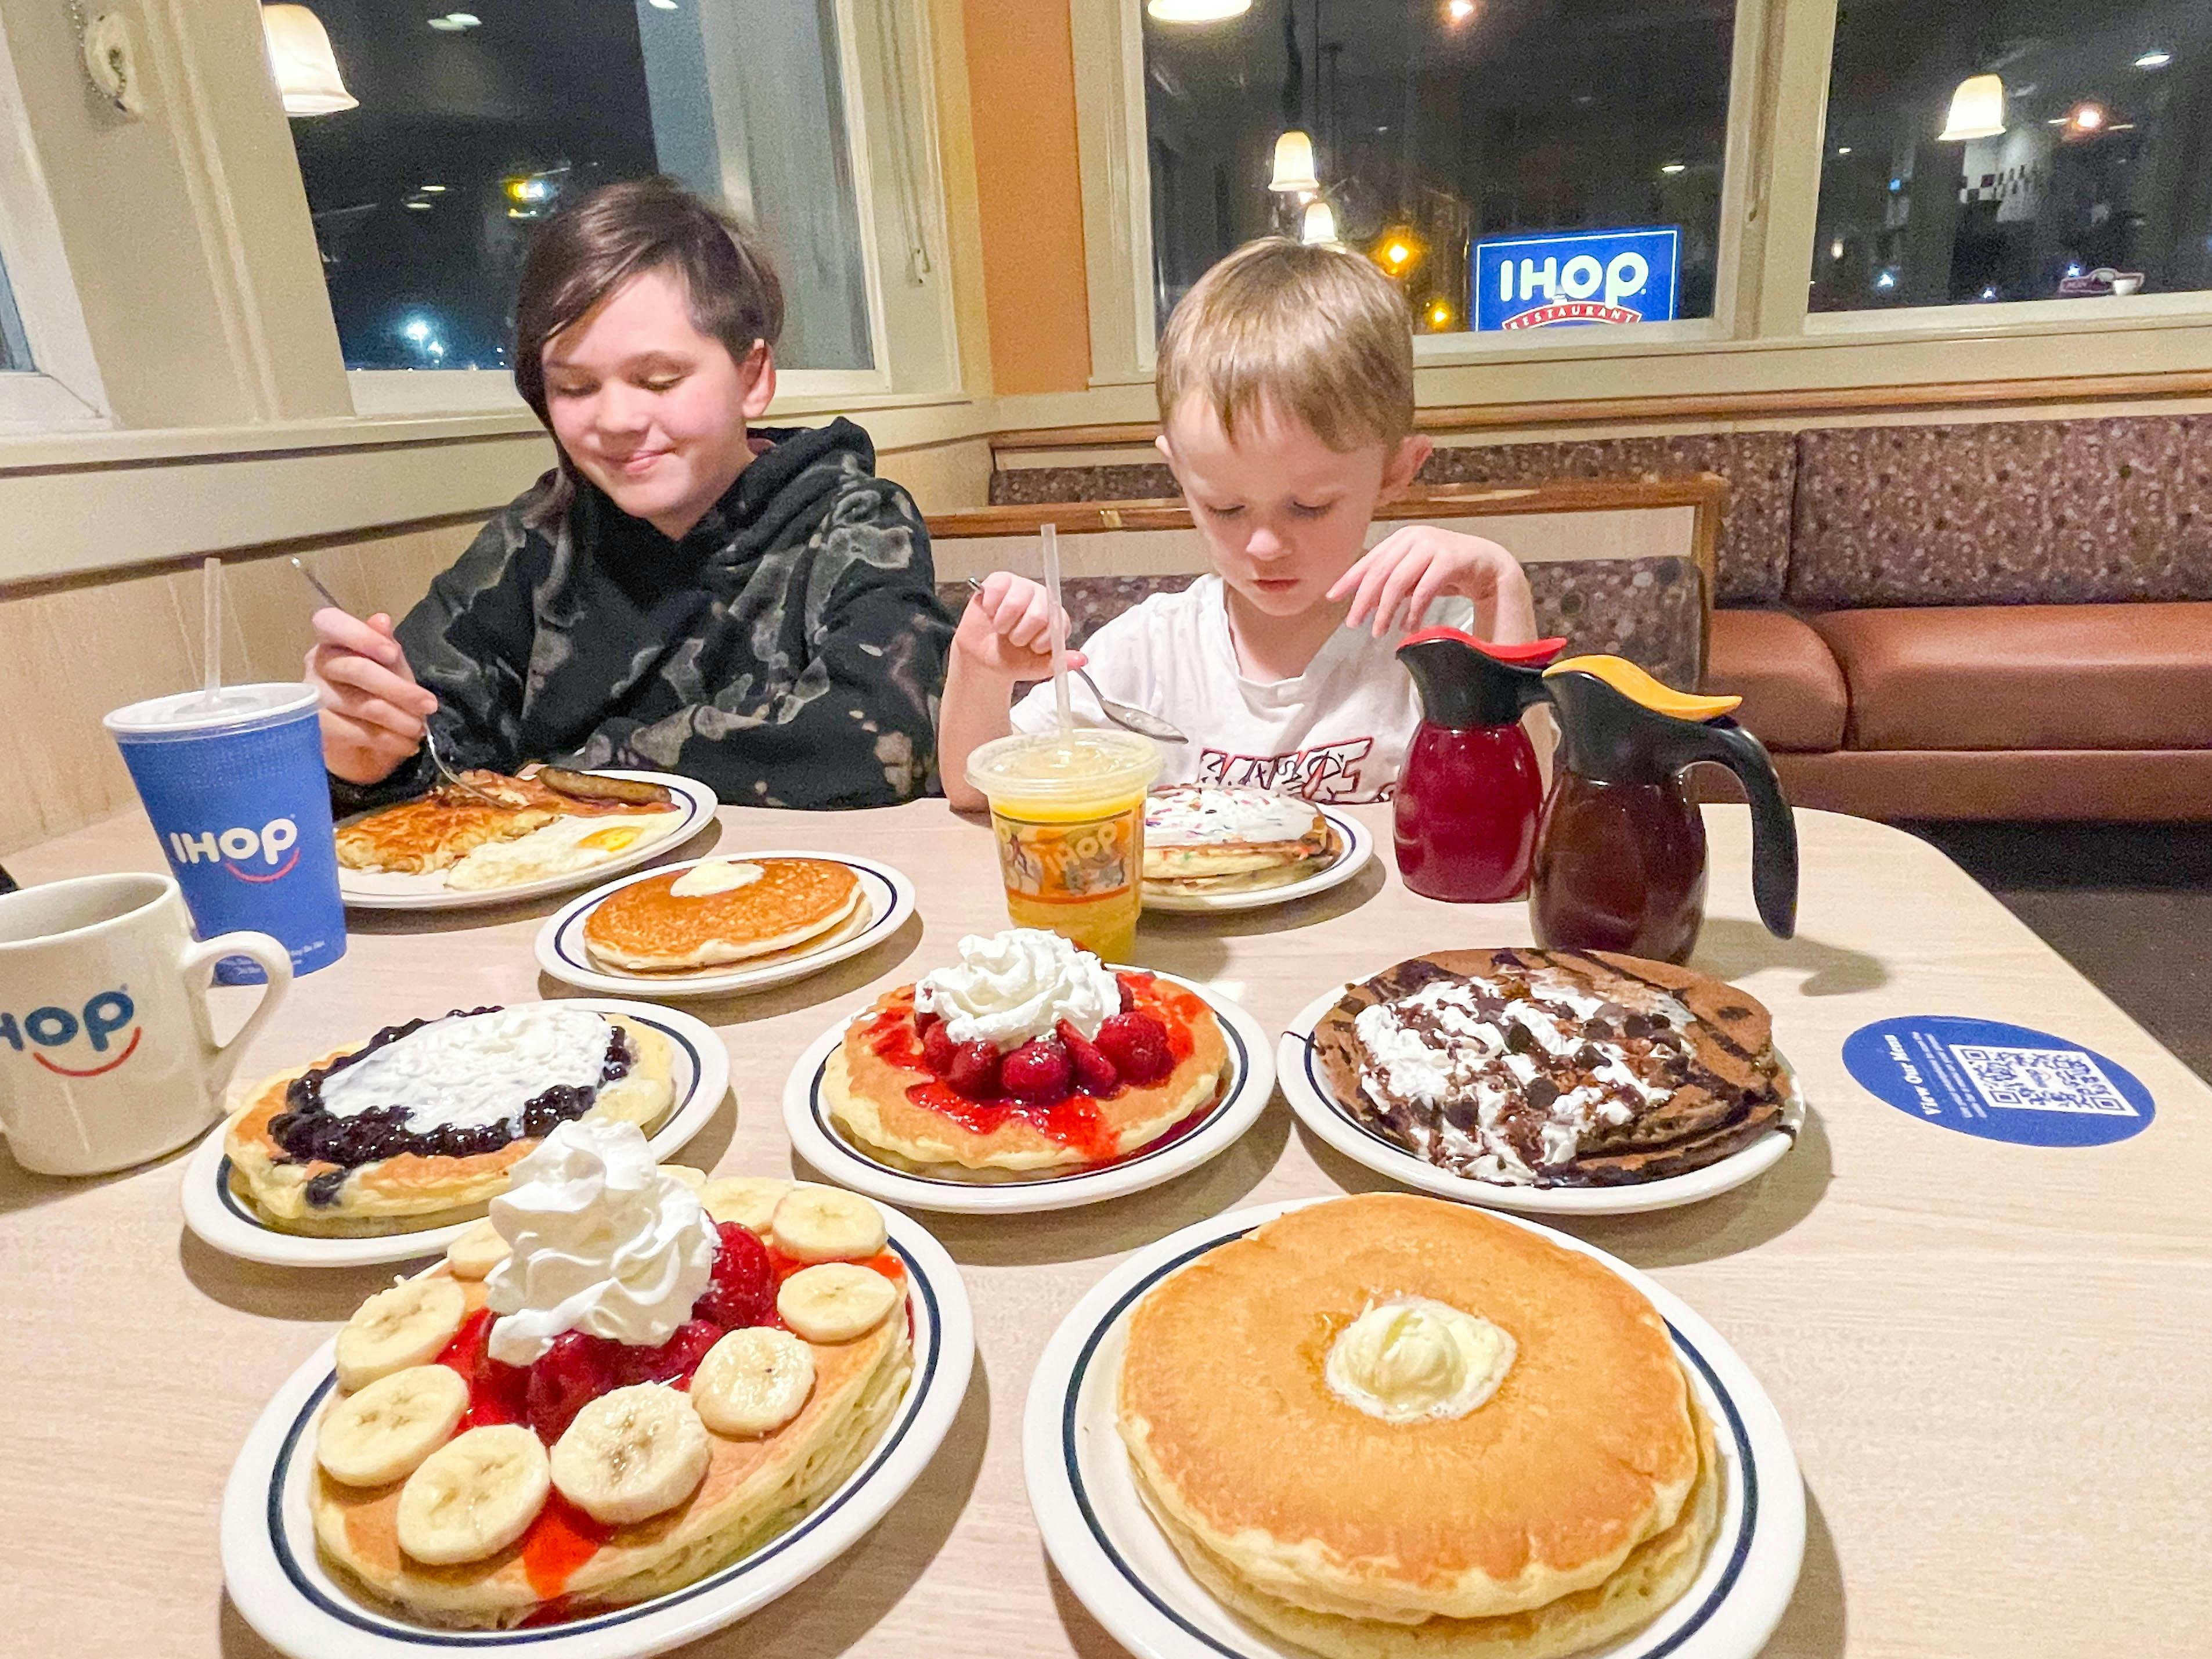 Kids Eat Free At Ihop Here S How It